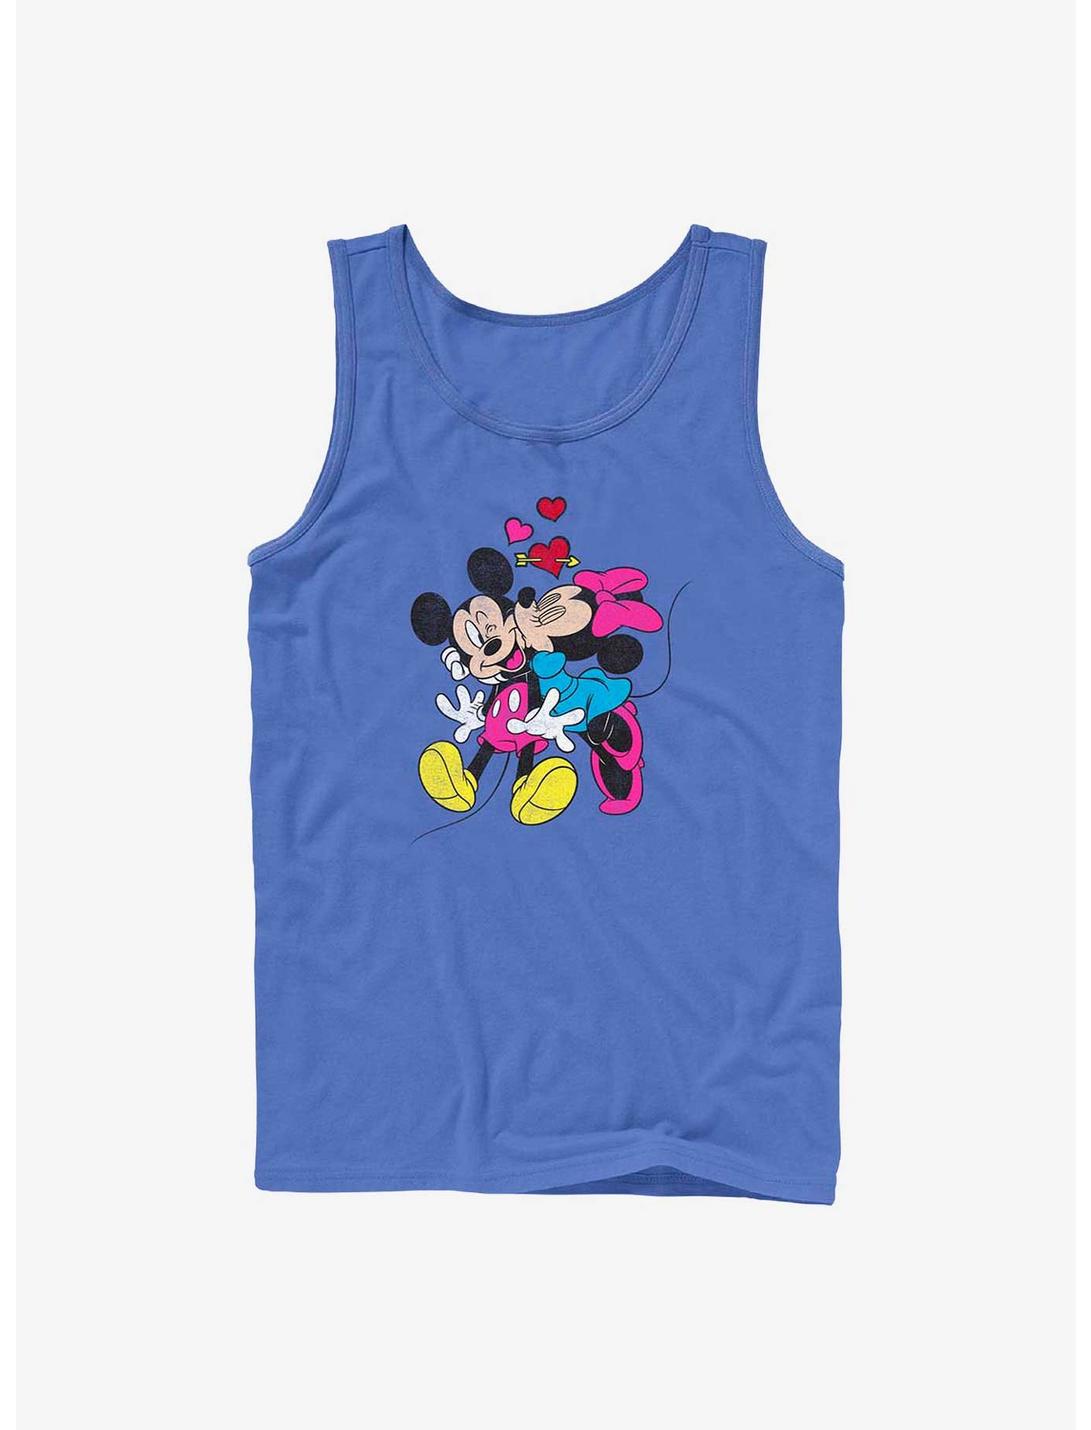 Disney Mickey Mouse & Minnie Mouse Love Tank Top - BLUE